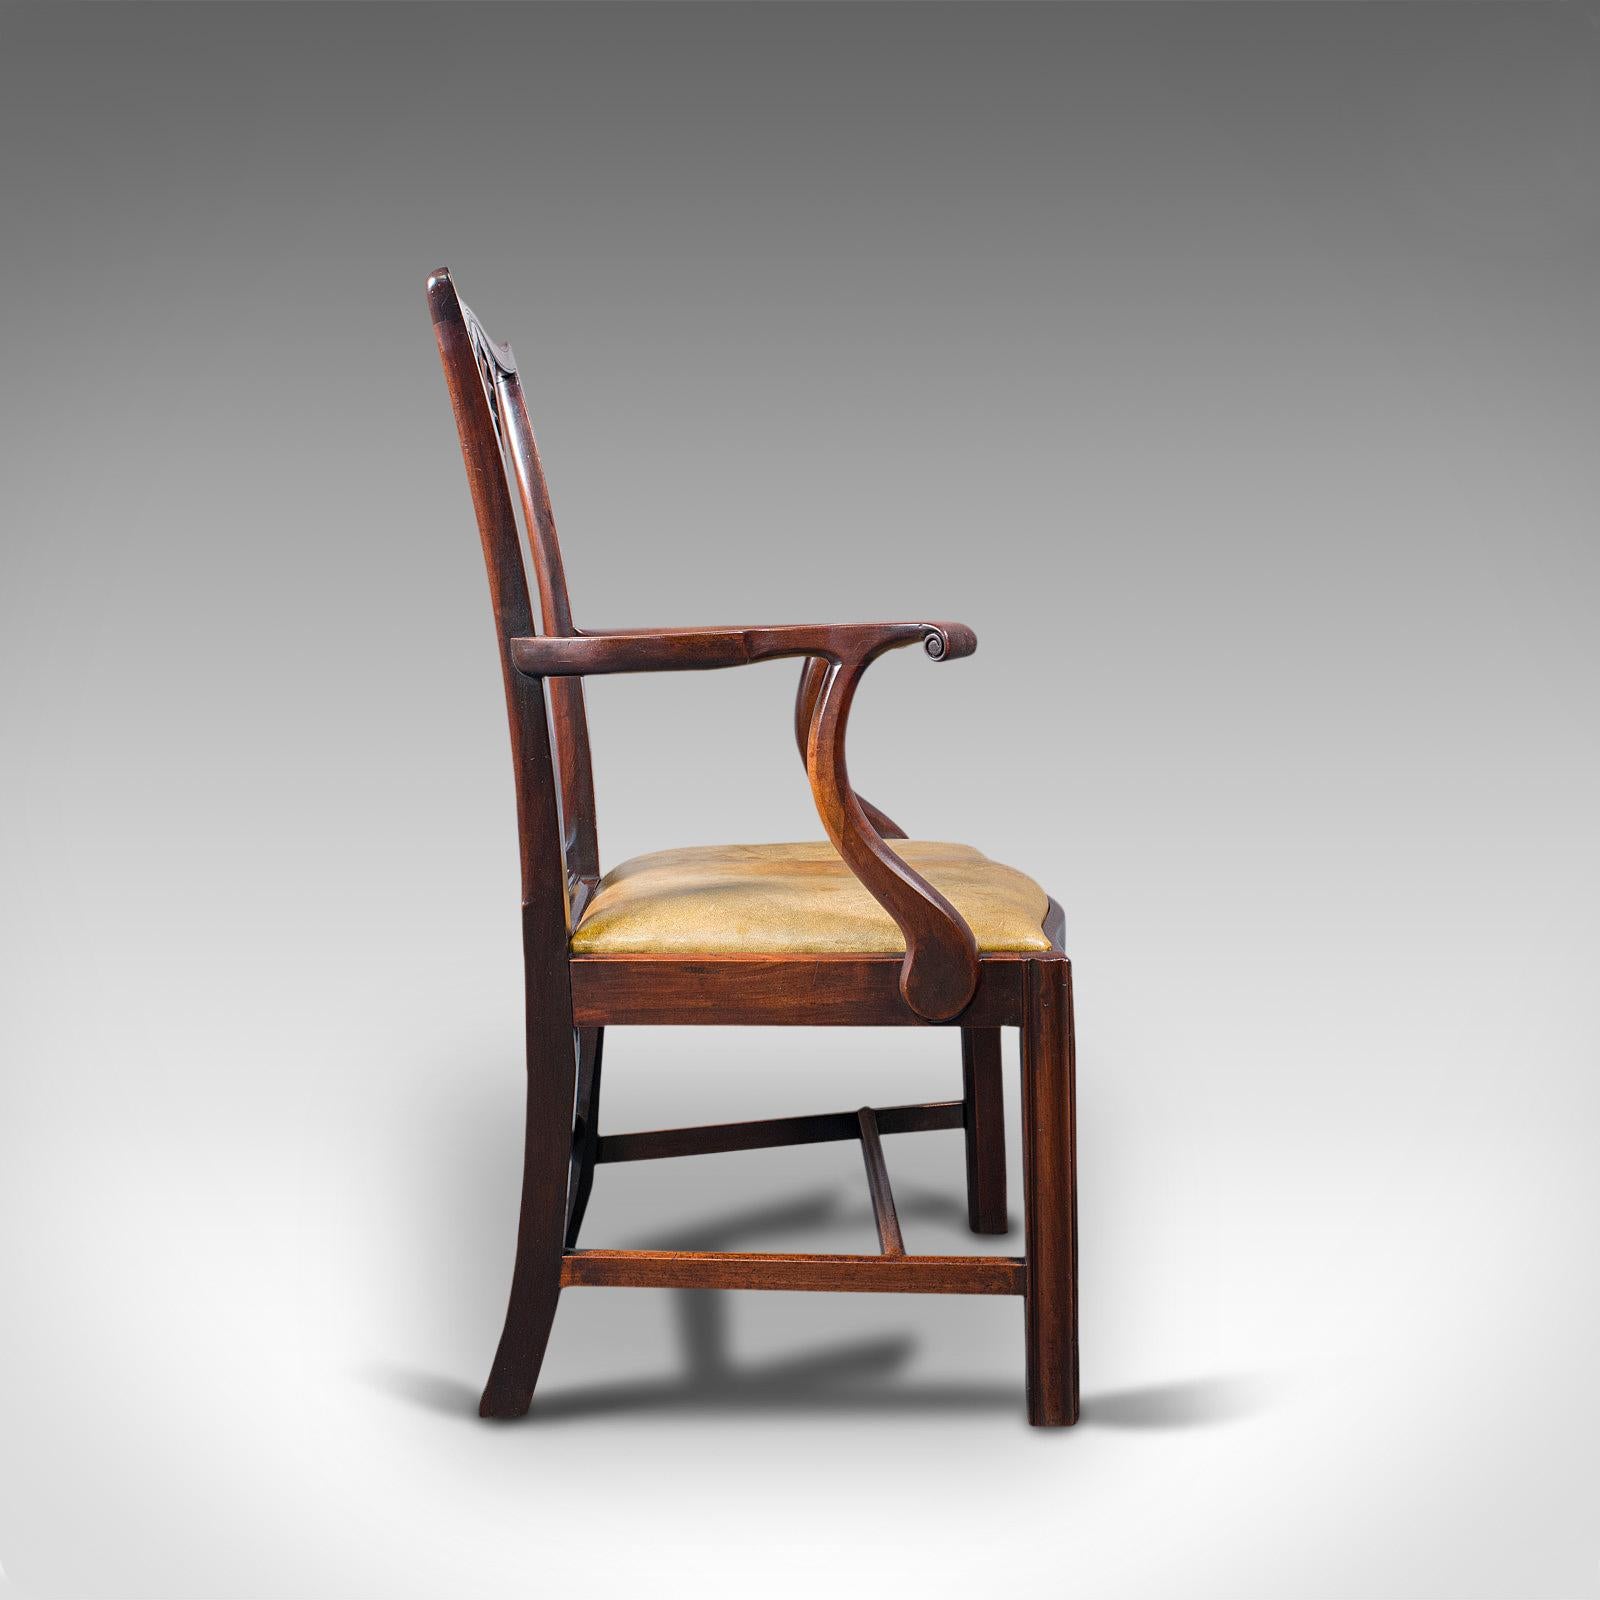 British Antique, Set of 6, Dining Chairs, English, Mahogany, Leather, Seats, Victorian For Sale